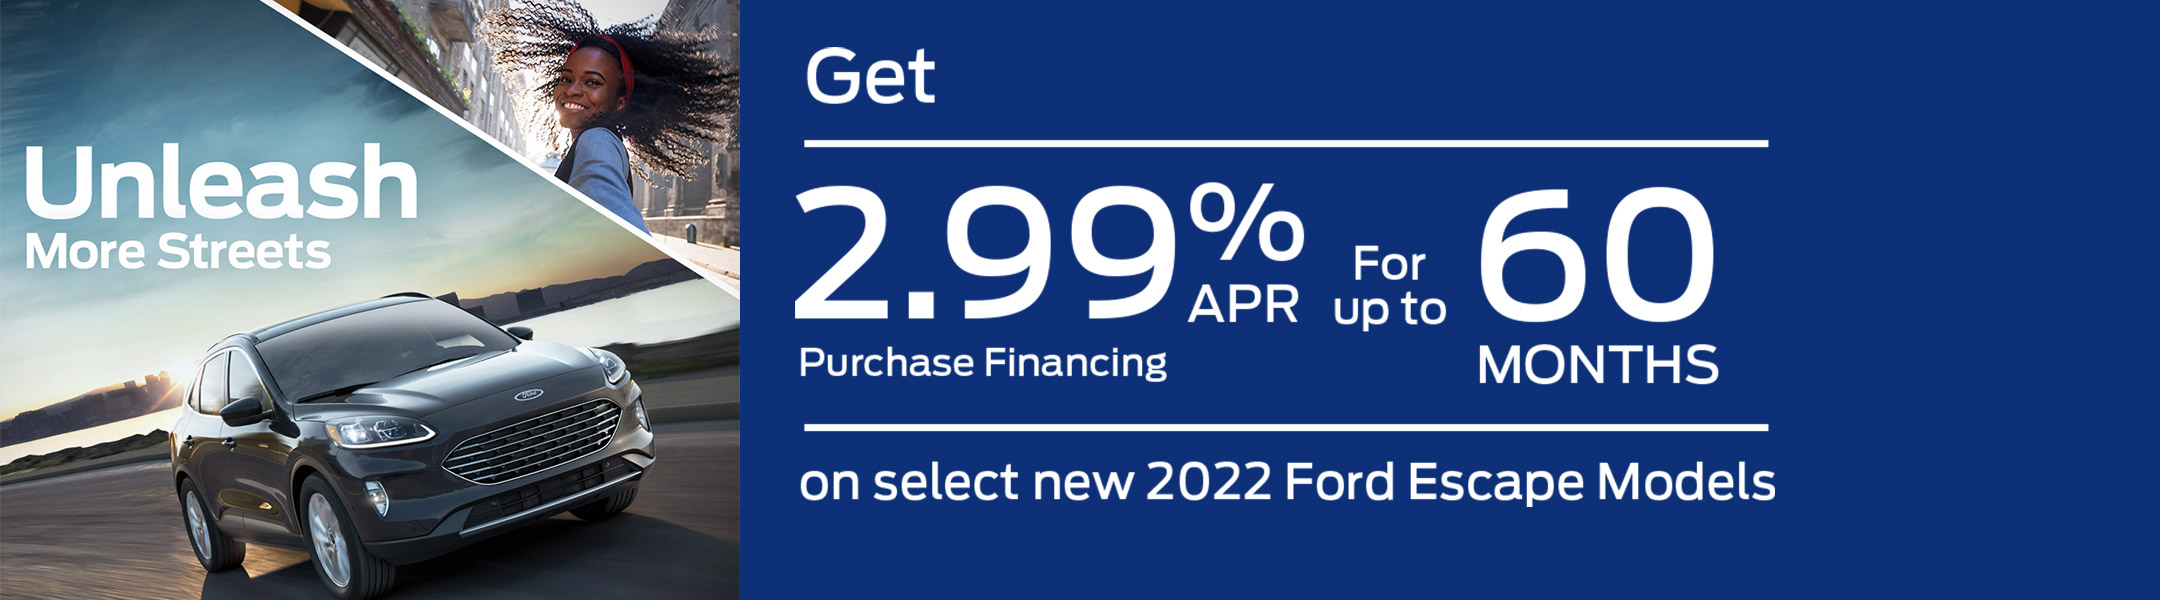 2022 Ford Escape Offer at Downtown Ford